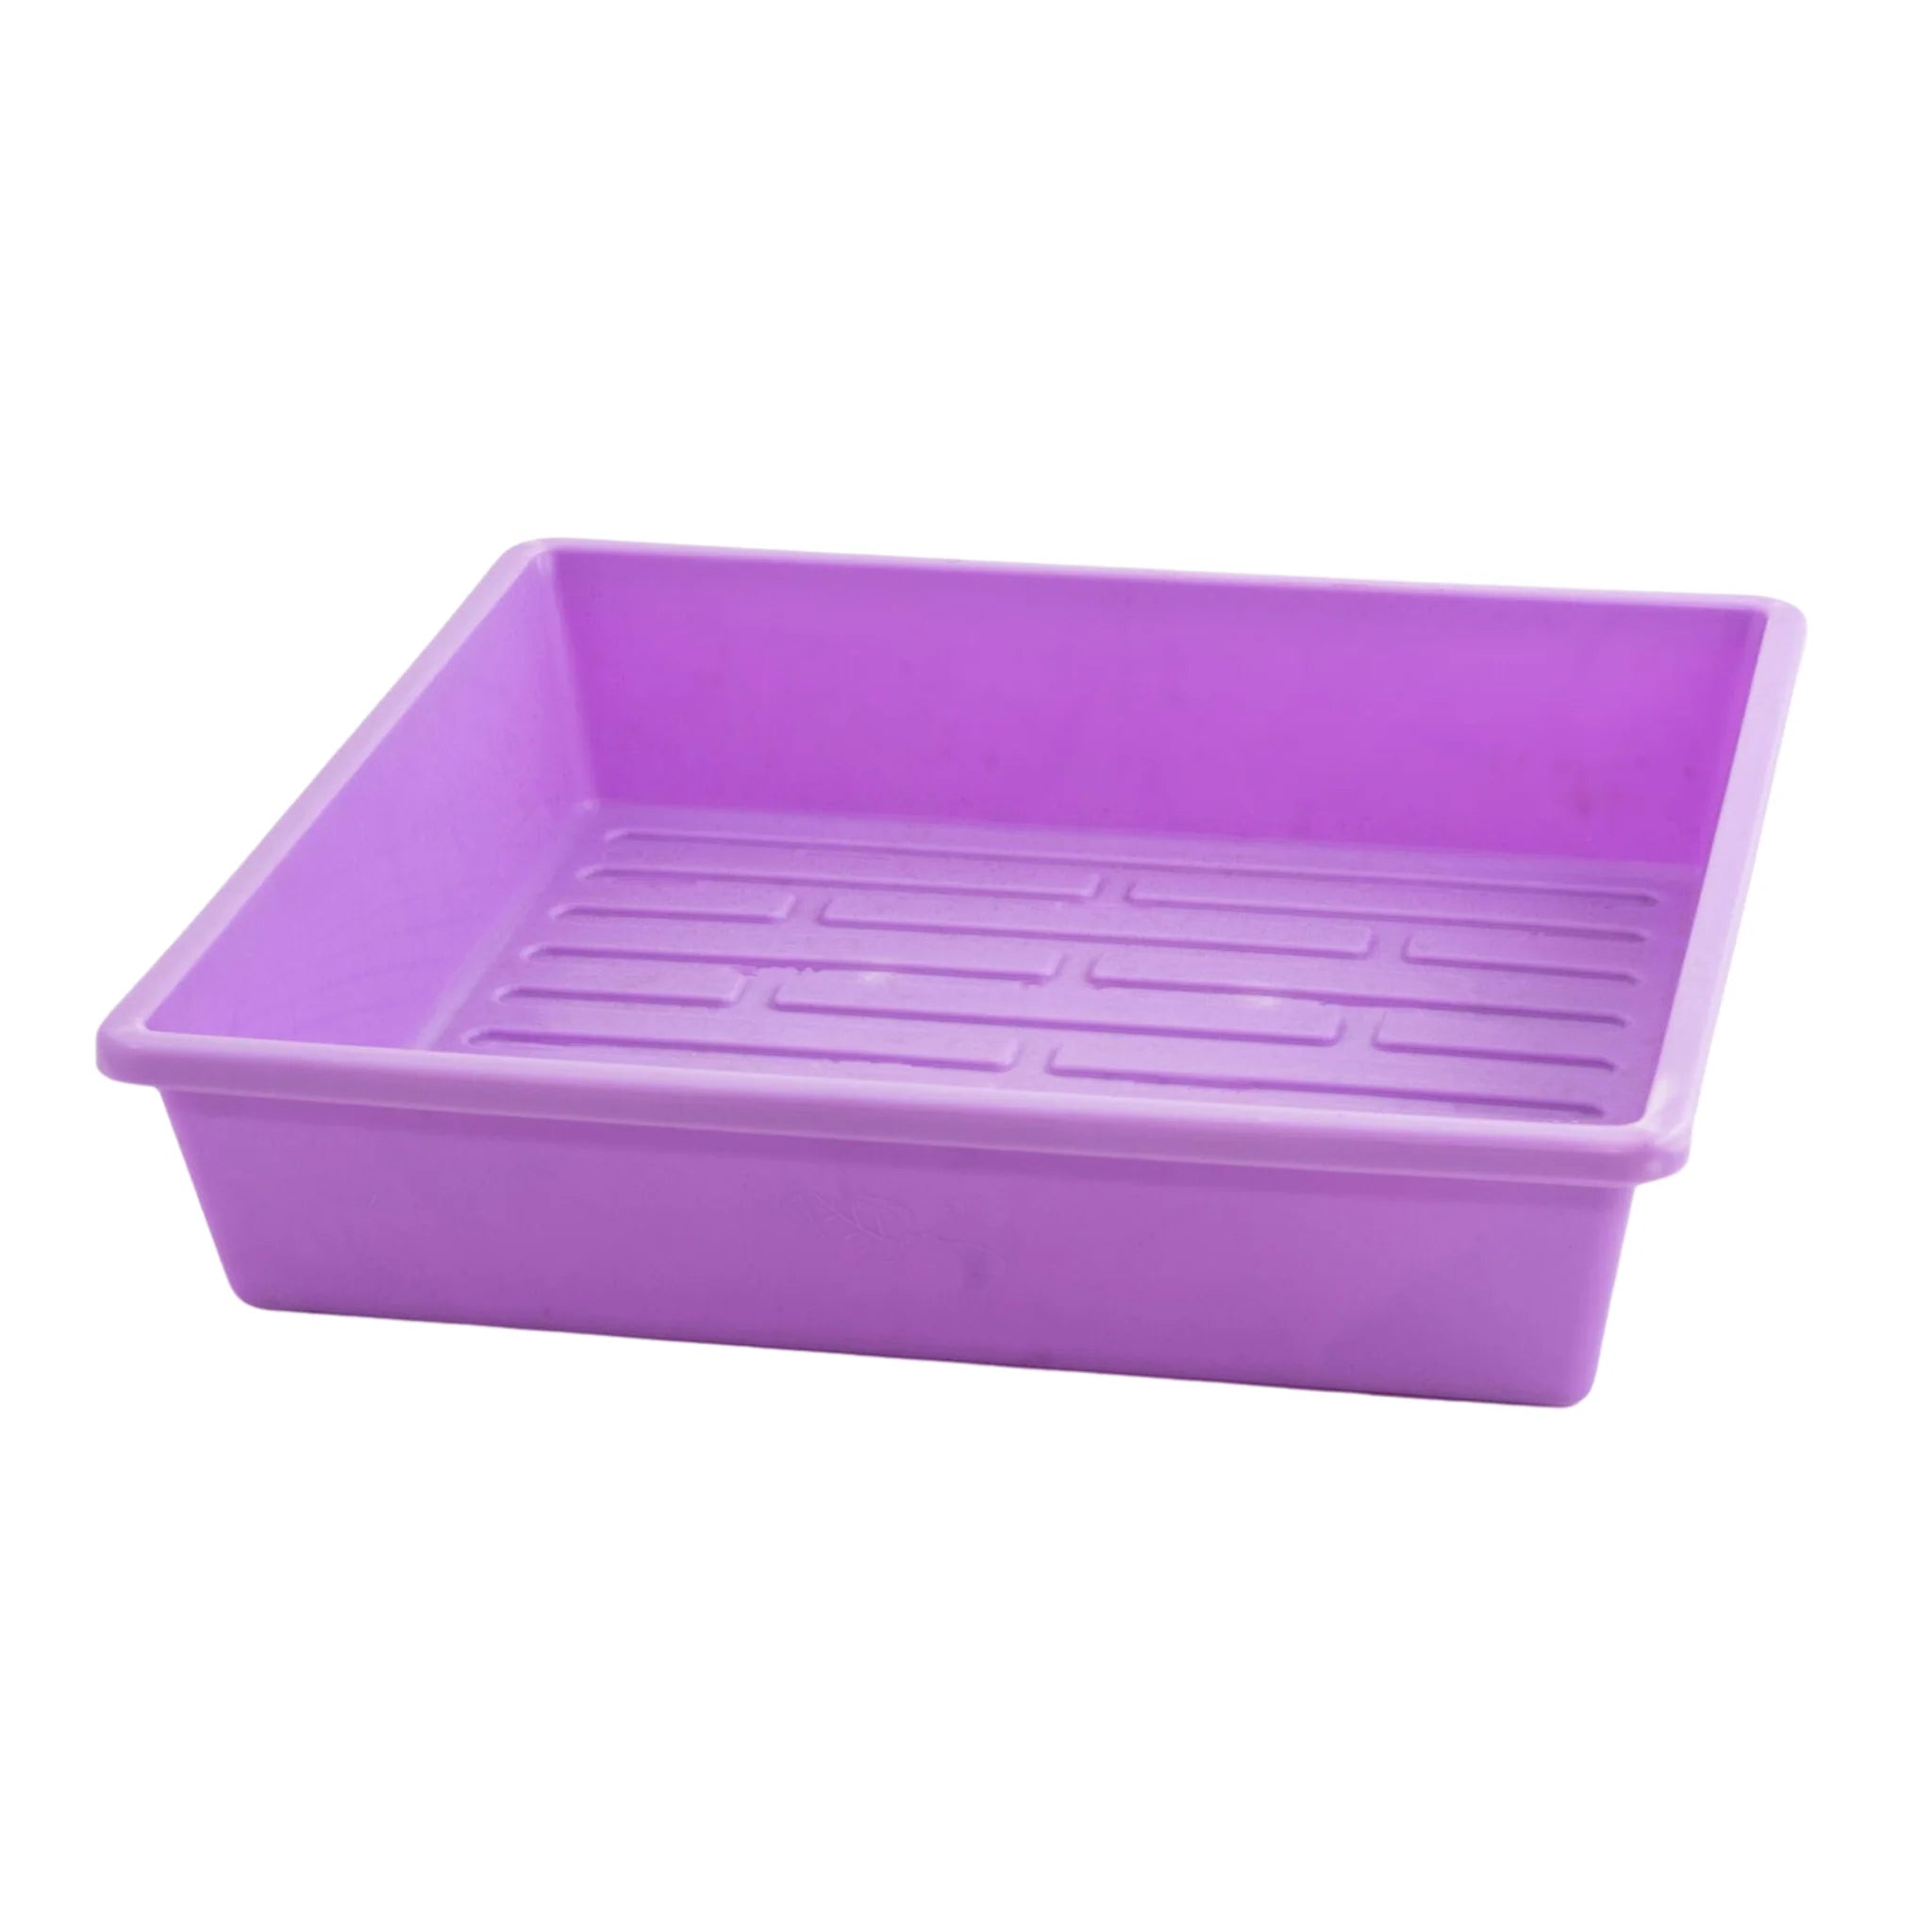 Bootstrap Farmer 1010 Seed Germination Tray 2.5" Deep, No Holes | Assorted Colors